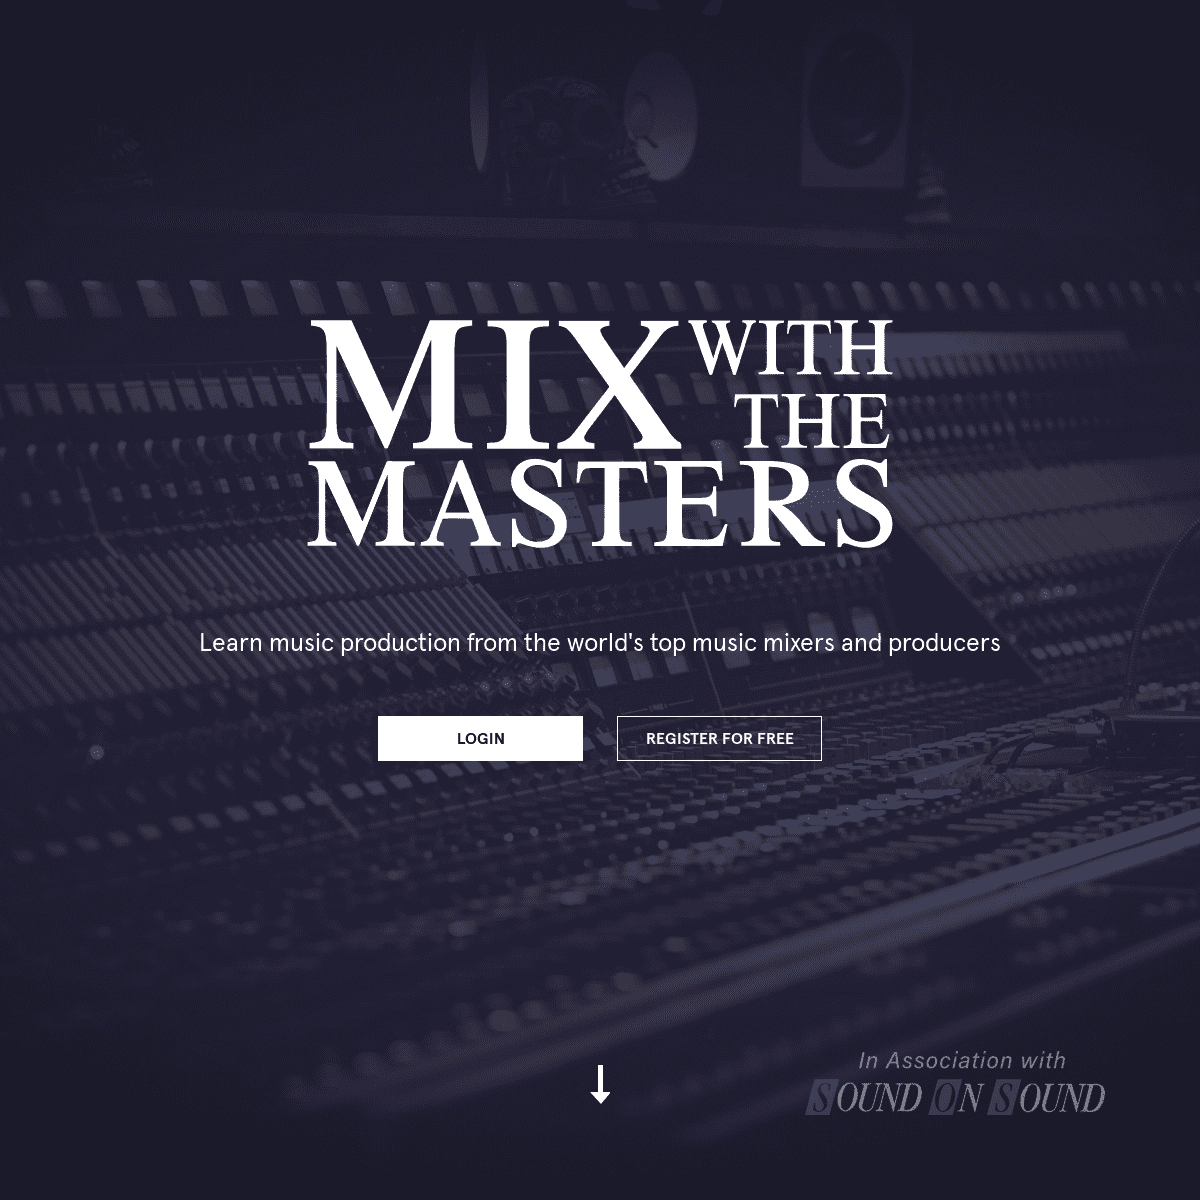 A complete backup of mixwiththemasters.com